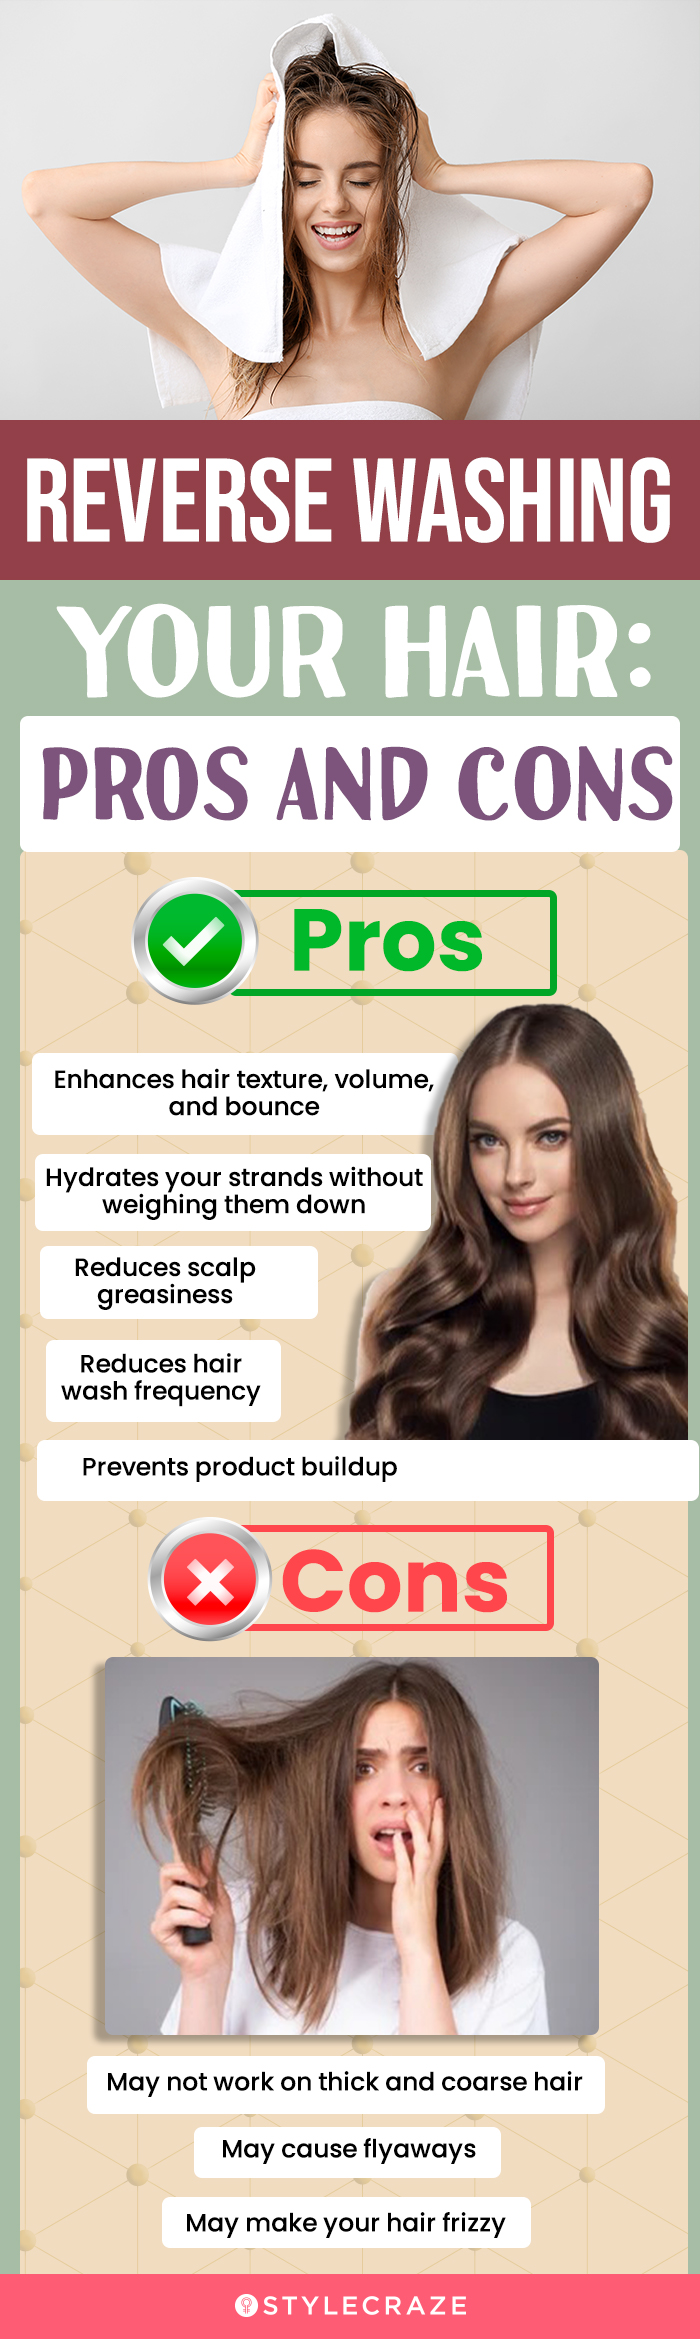 reverse washing your hair (infographic)